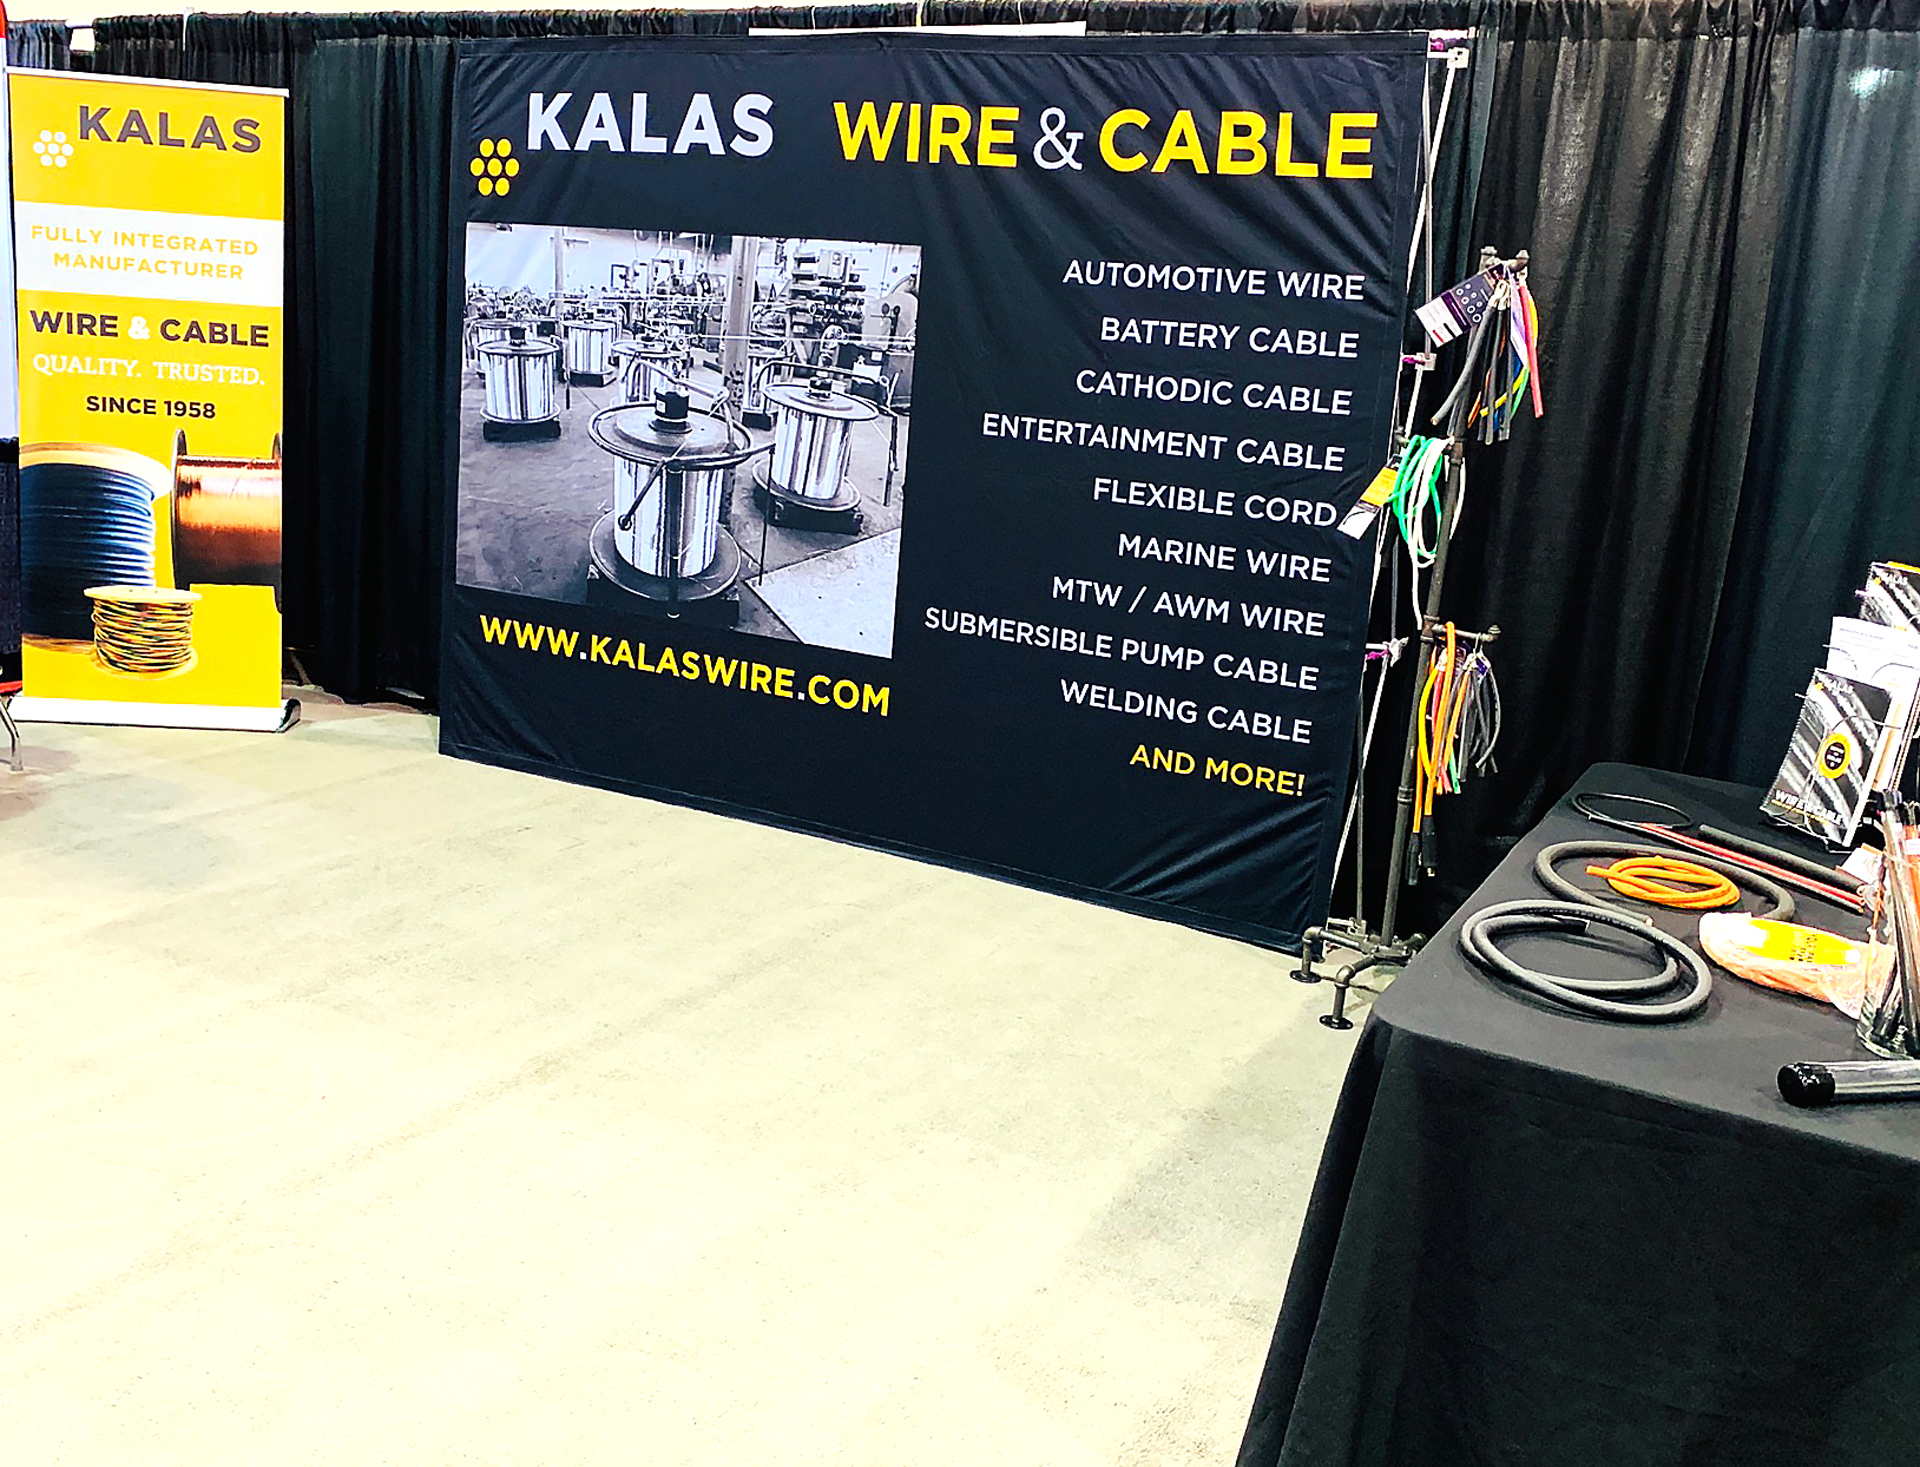 Kalas at Electrical Wire Processing Technology Expo Kalas Wire